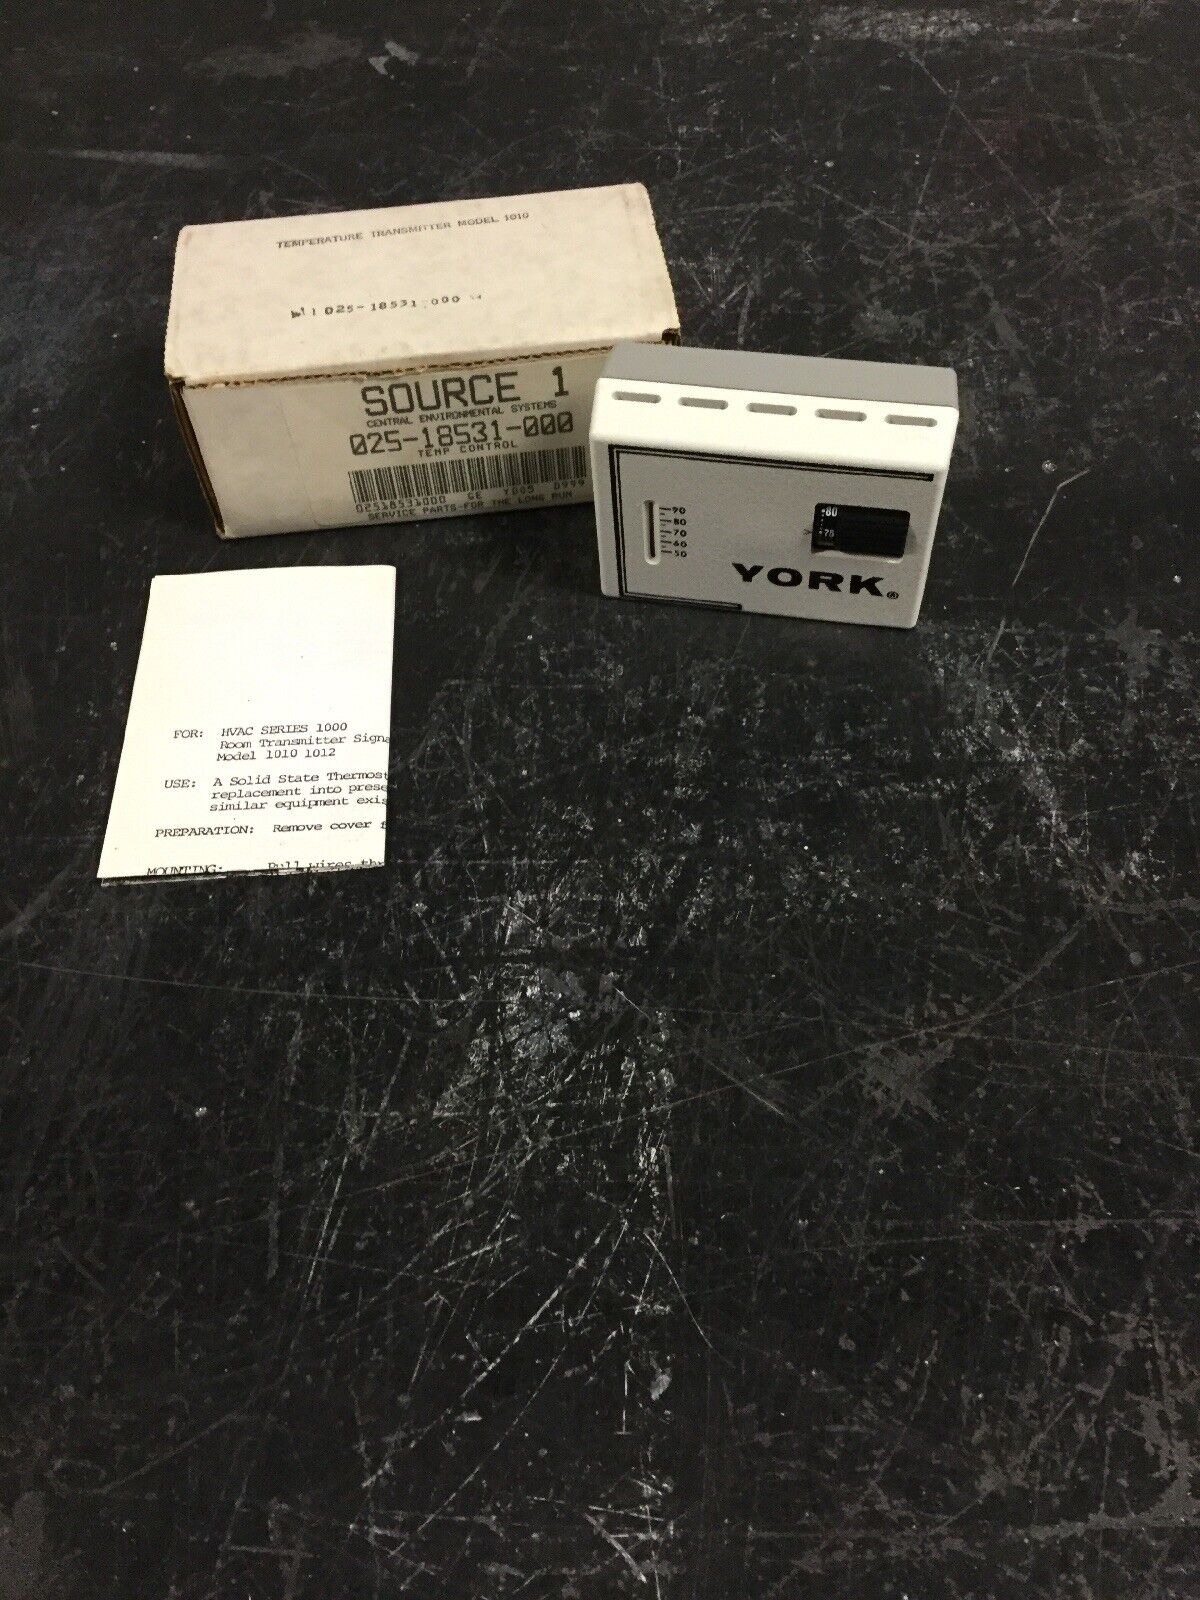 NEW, SOURCE 1, YORK, 025-18531-000, SPACE TEMP LOAD TRANSMITTER. (10D-2)